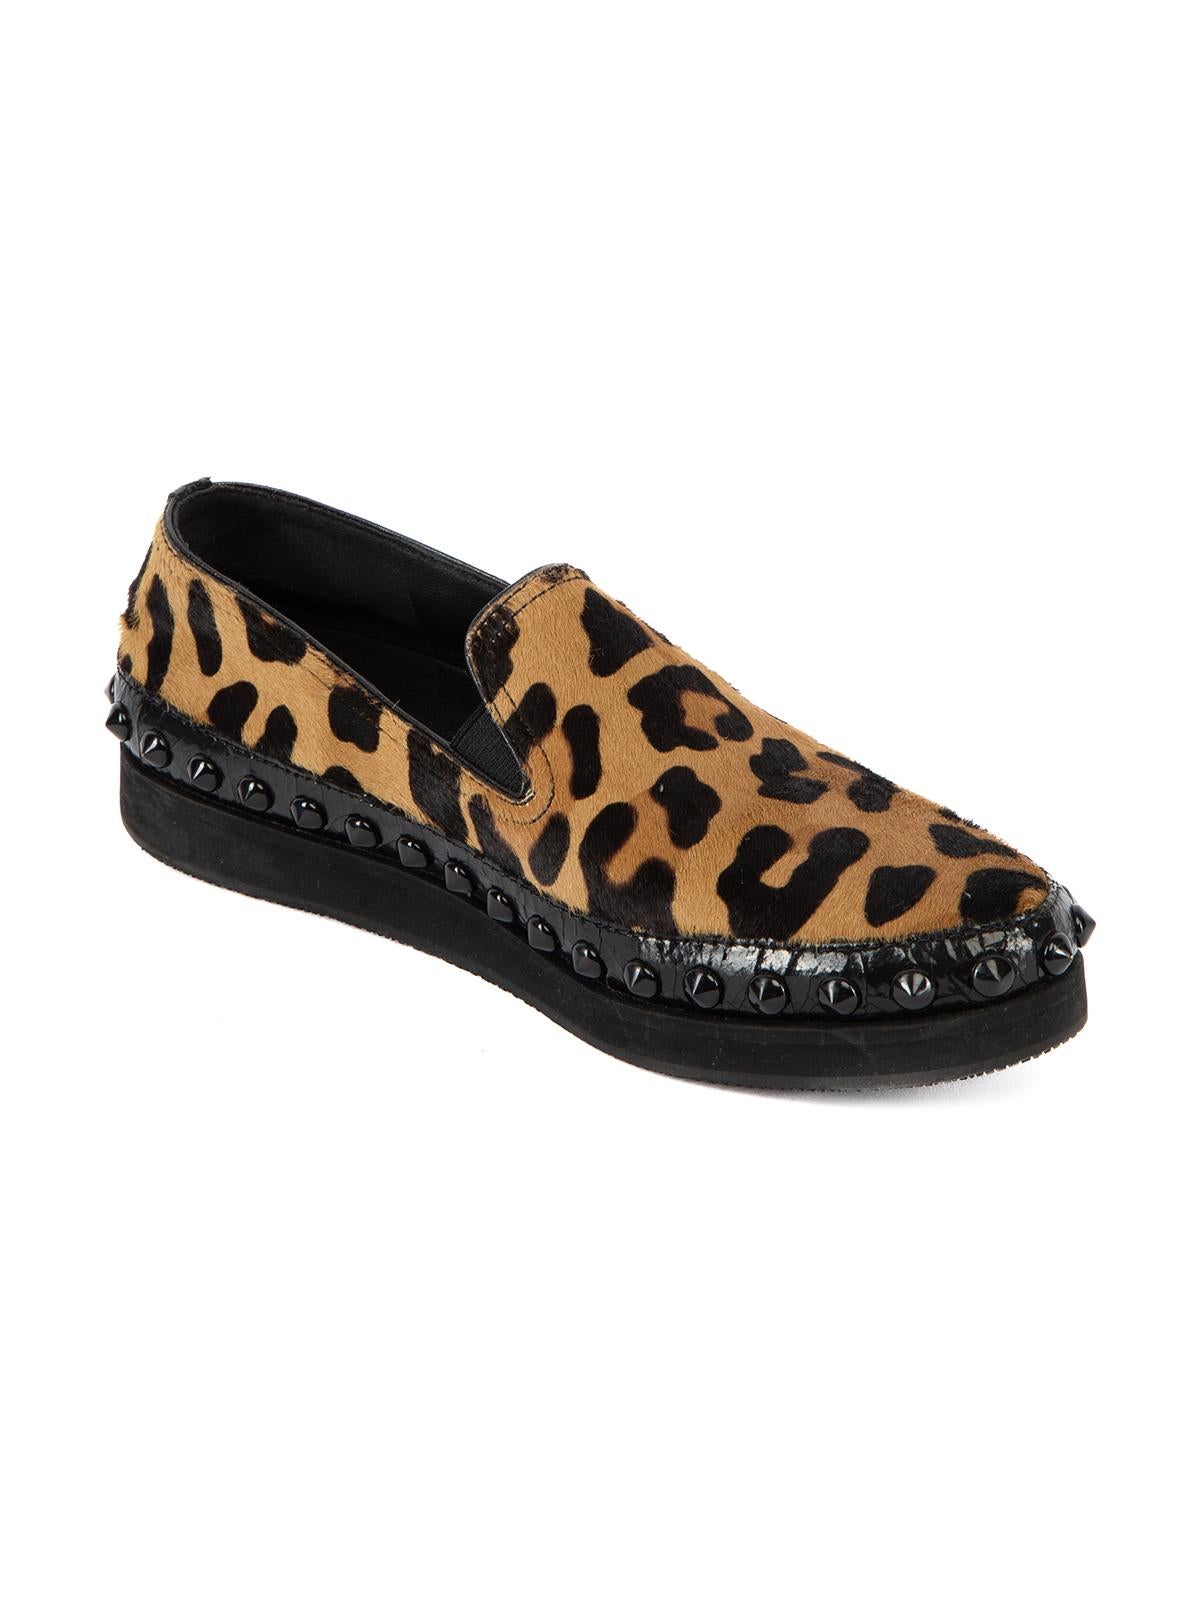 CONDITION is Very good. Hardly any visible wear to loafers is evident apart from some light scuffs to the midsoles on this used Prada designer resale item. Details Multicoloured: leopard print Fur Leather lining Black studs Slip-on Almond-toe